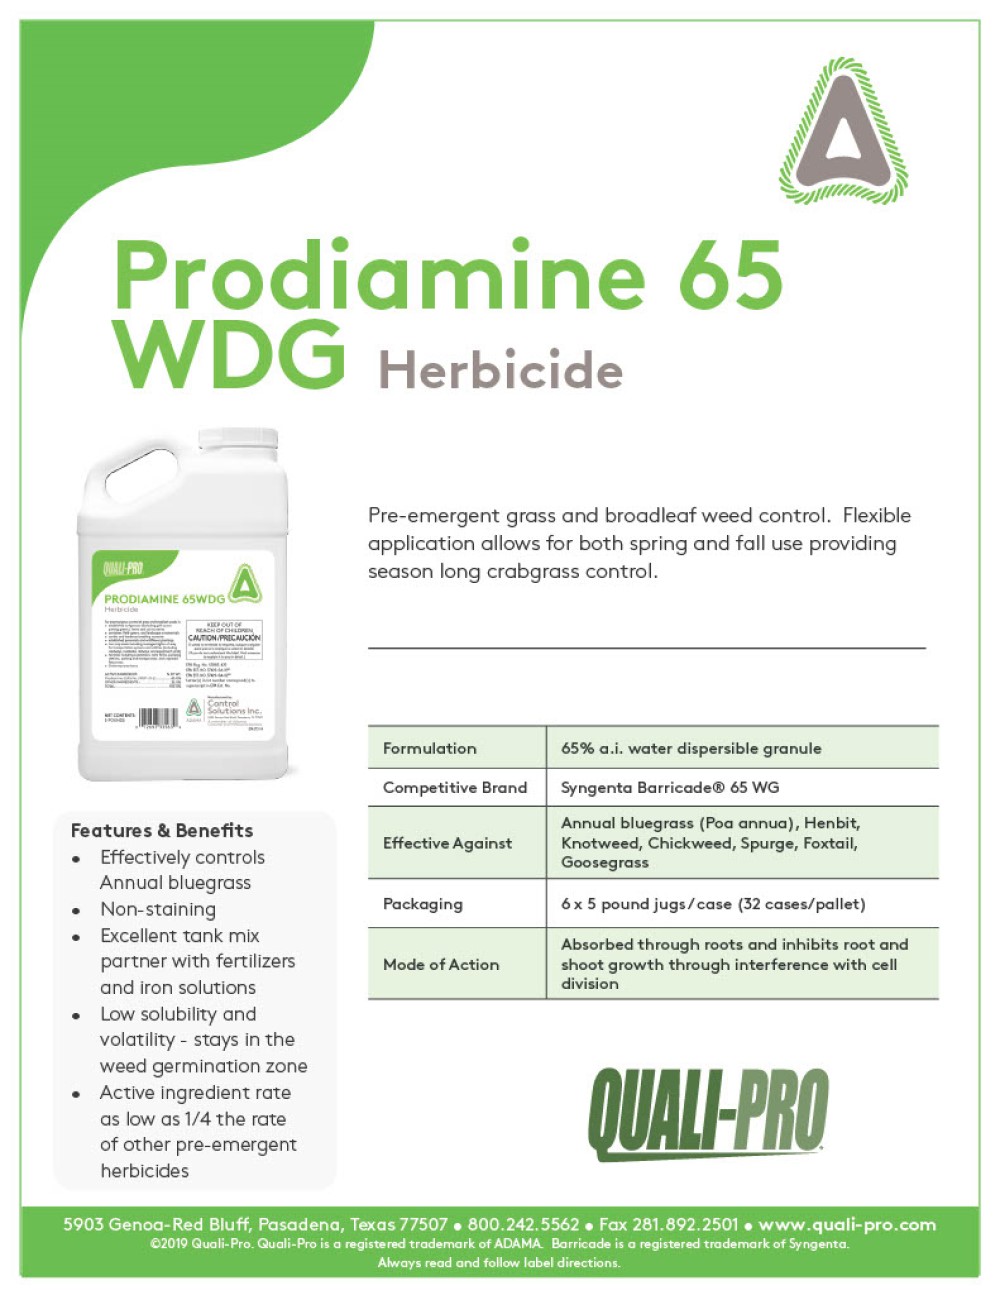 Quali-Pro Prodiamine 65 WDG Pre-Emergent Herbicide (Generic Barricade) - 5 Lbs Jug by Control Soultions - image 3 of 3